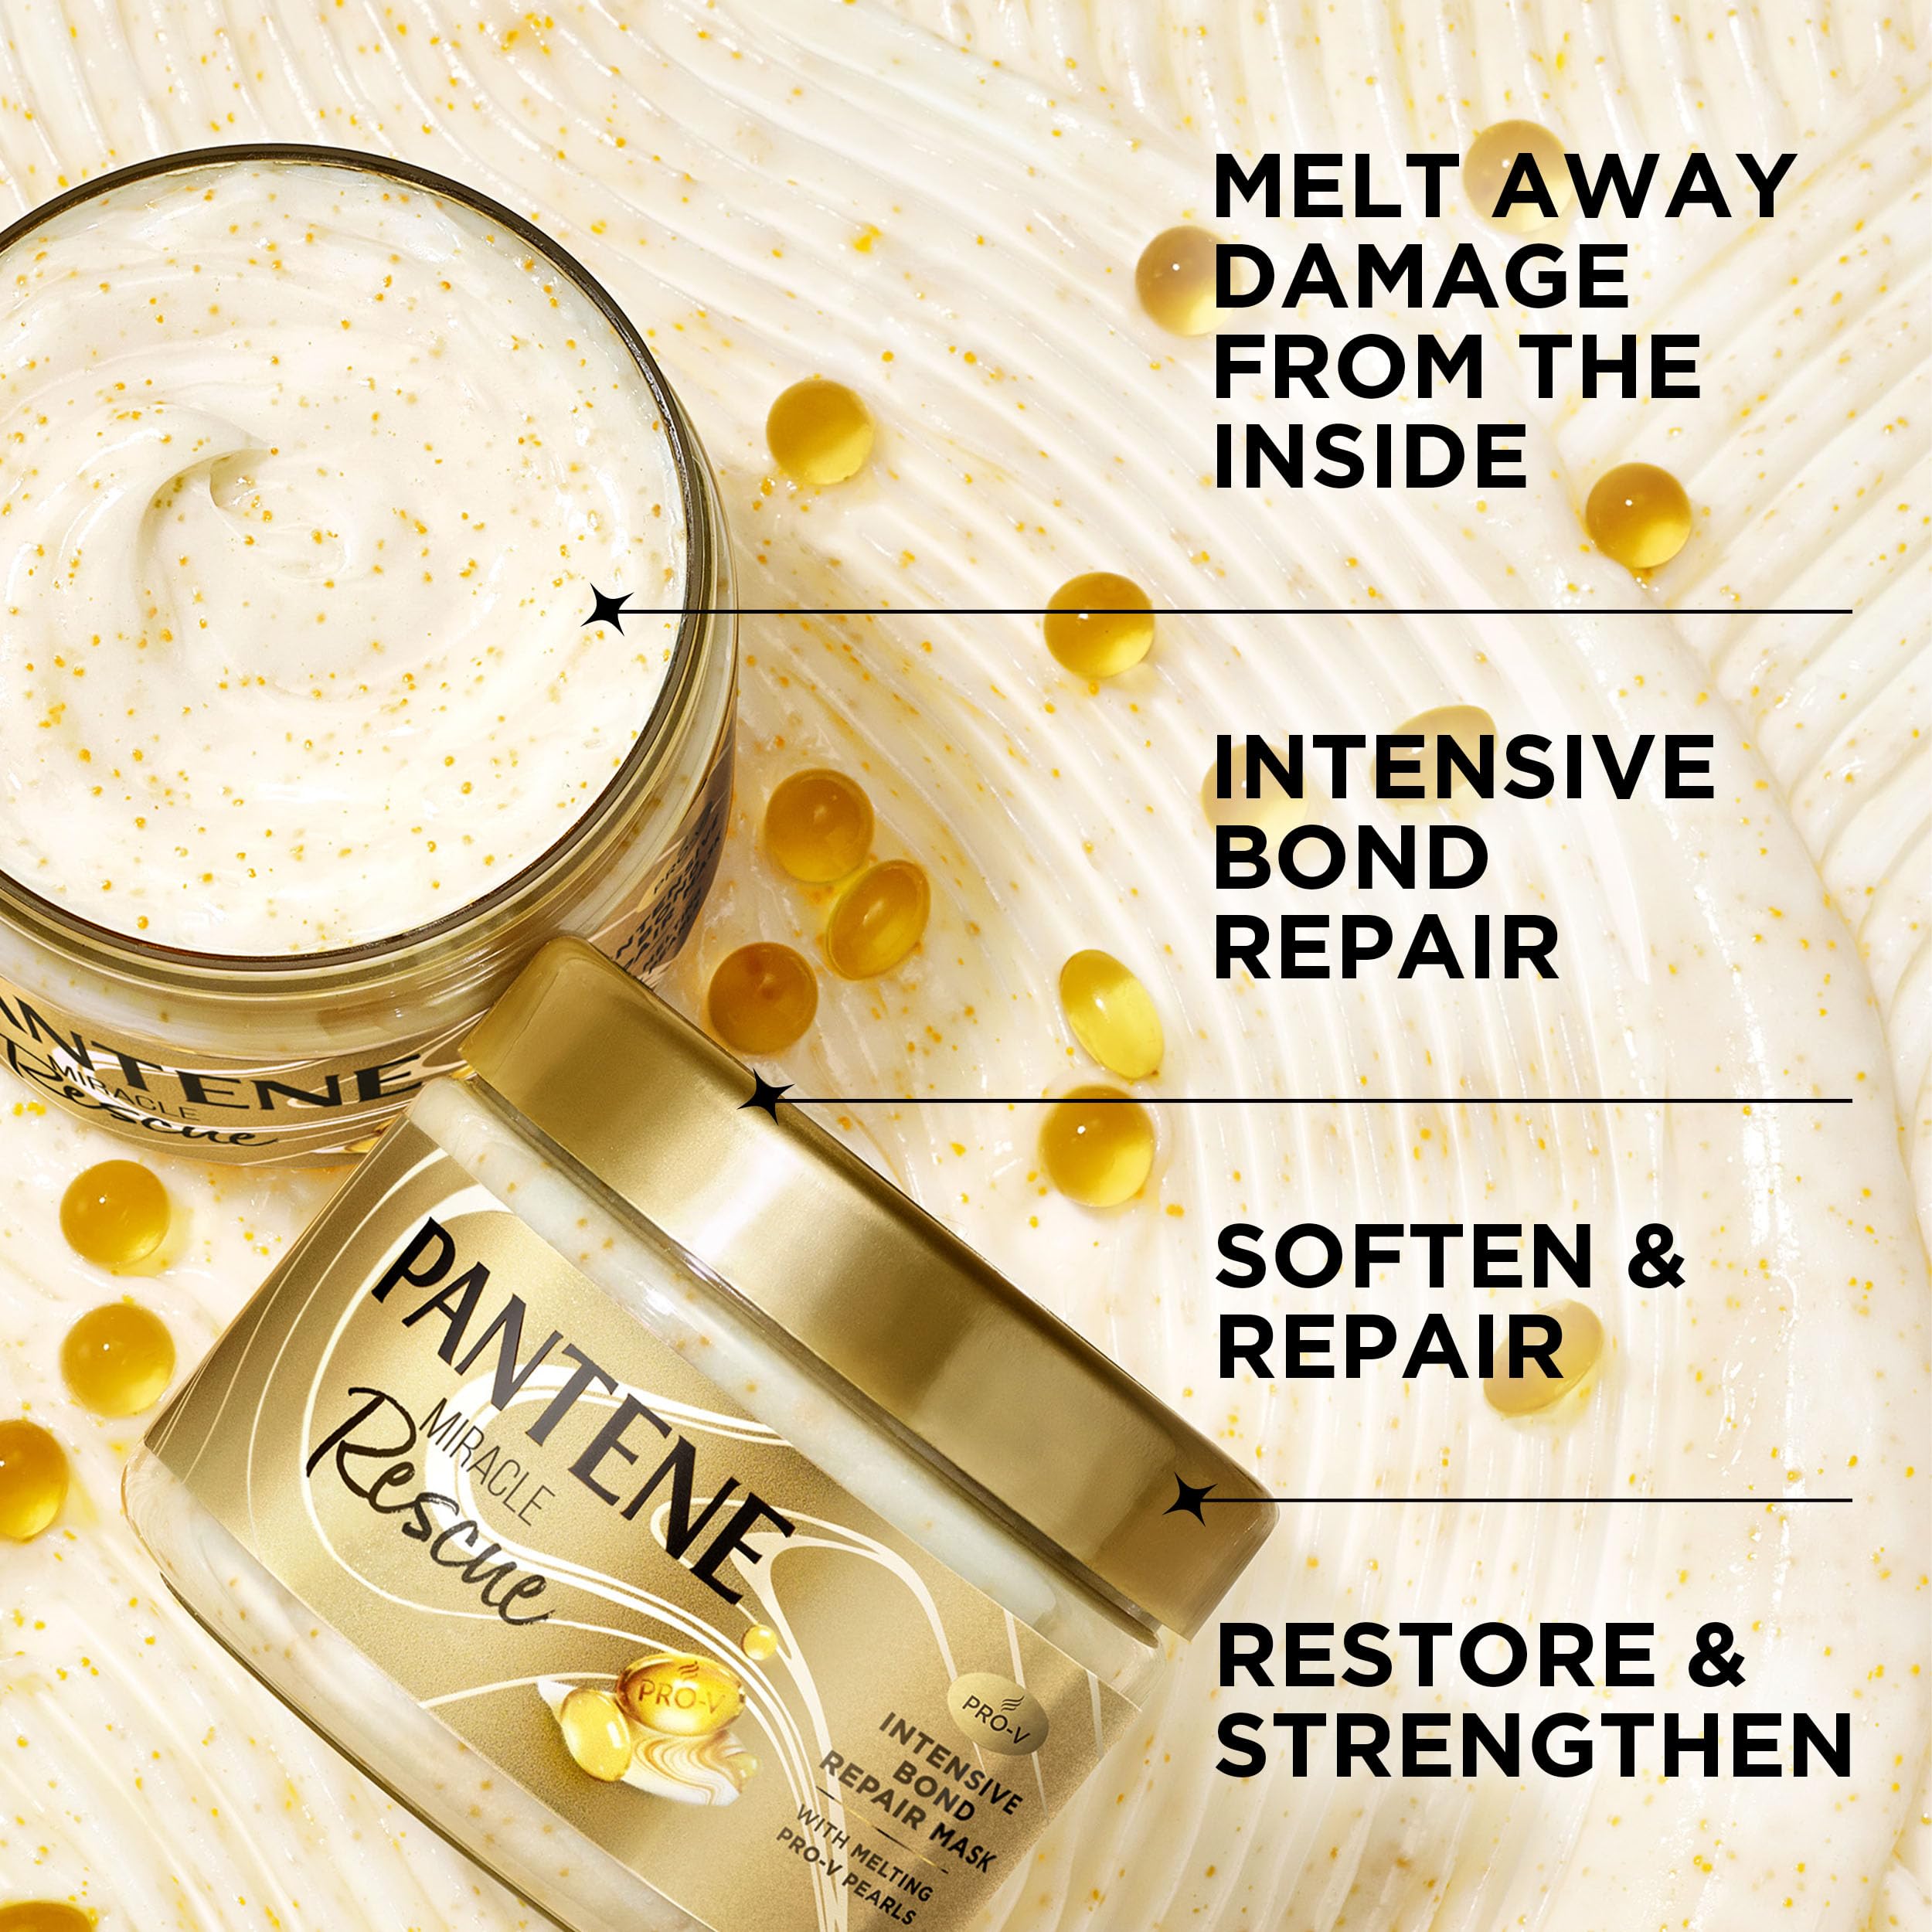 Pantene Miracle Rescue Hair Mask, Intensive Bond Repair with Melting Pro-V Pearls, Melts Away Damage, Builds Bonds, Strengthens Against Damage, Deep Conditioning for Dry Damaged Hair, 10.1 fl oz